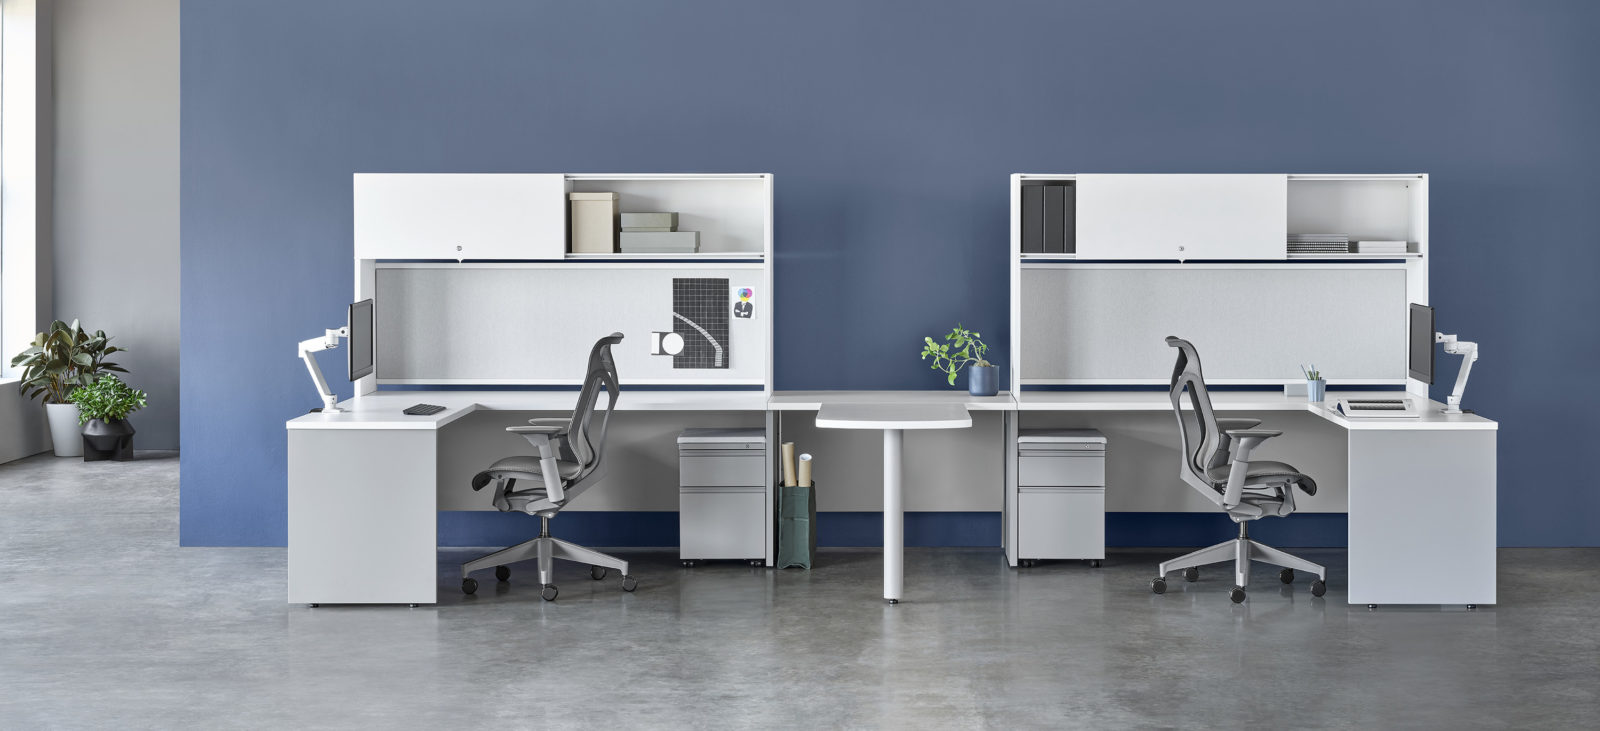 Cluster of 2 Herman Miller worskstations, white and grey, common worksurface between stations, Cosm task chairs